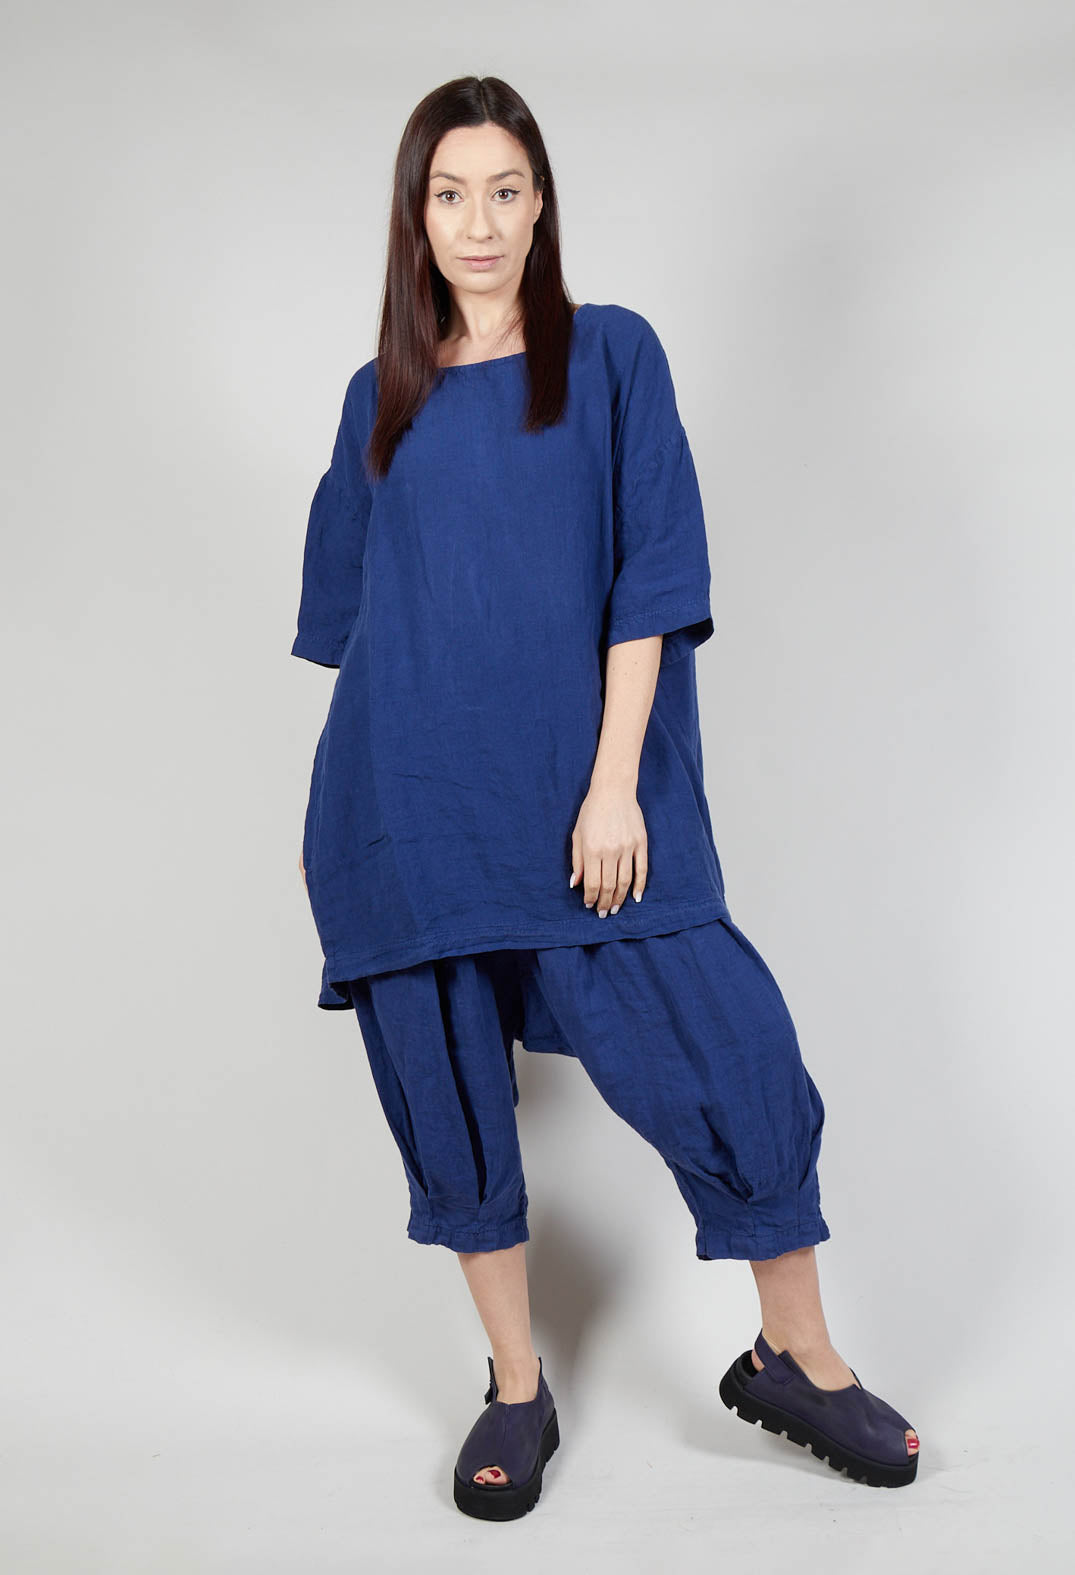 Relaxed Fit Linen Top in Azur